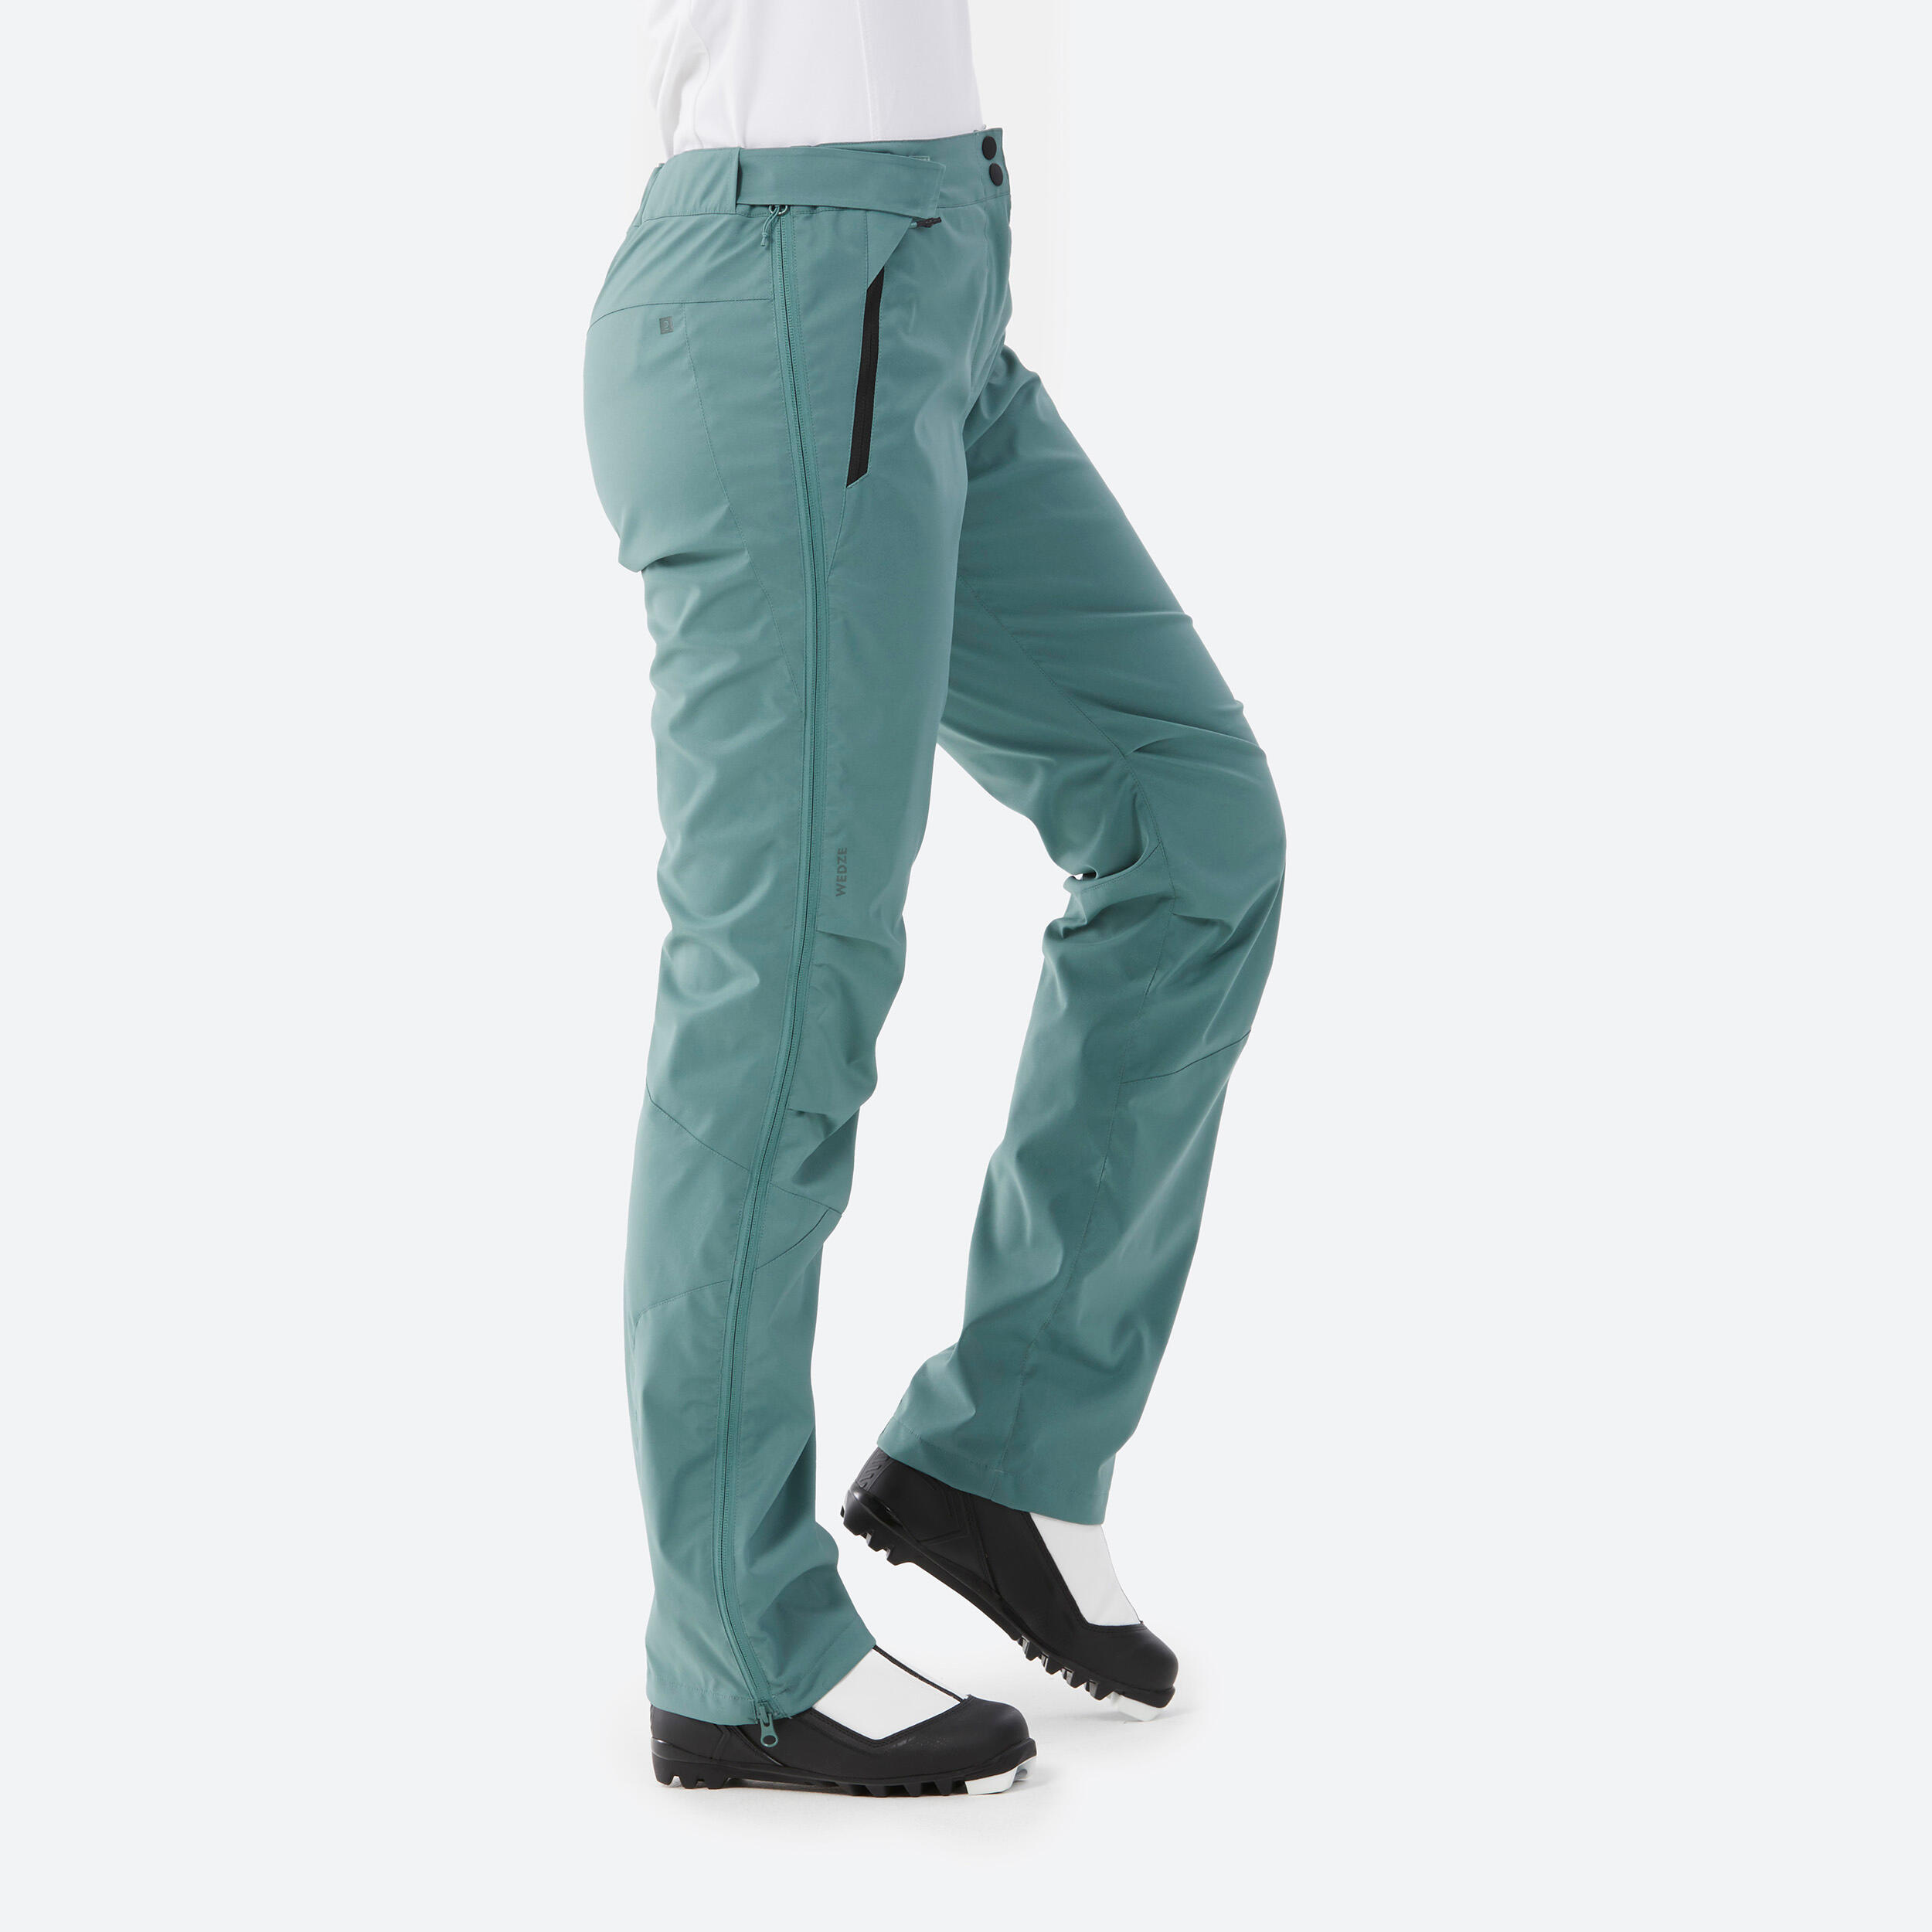 WOMEN'S 150 CROSS-COUNTRY SKI OVER-TROUSERS - GREEN 4/9